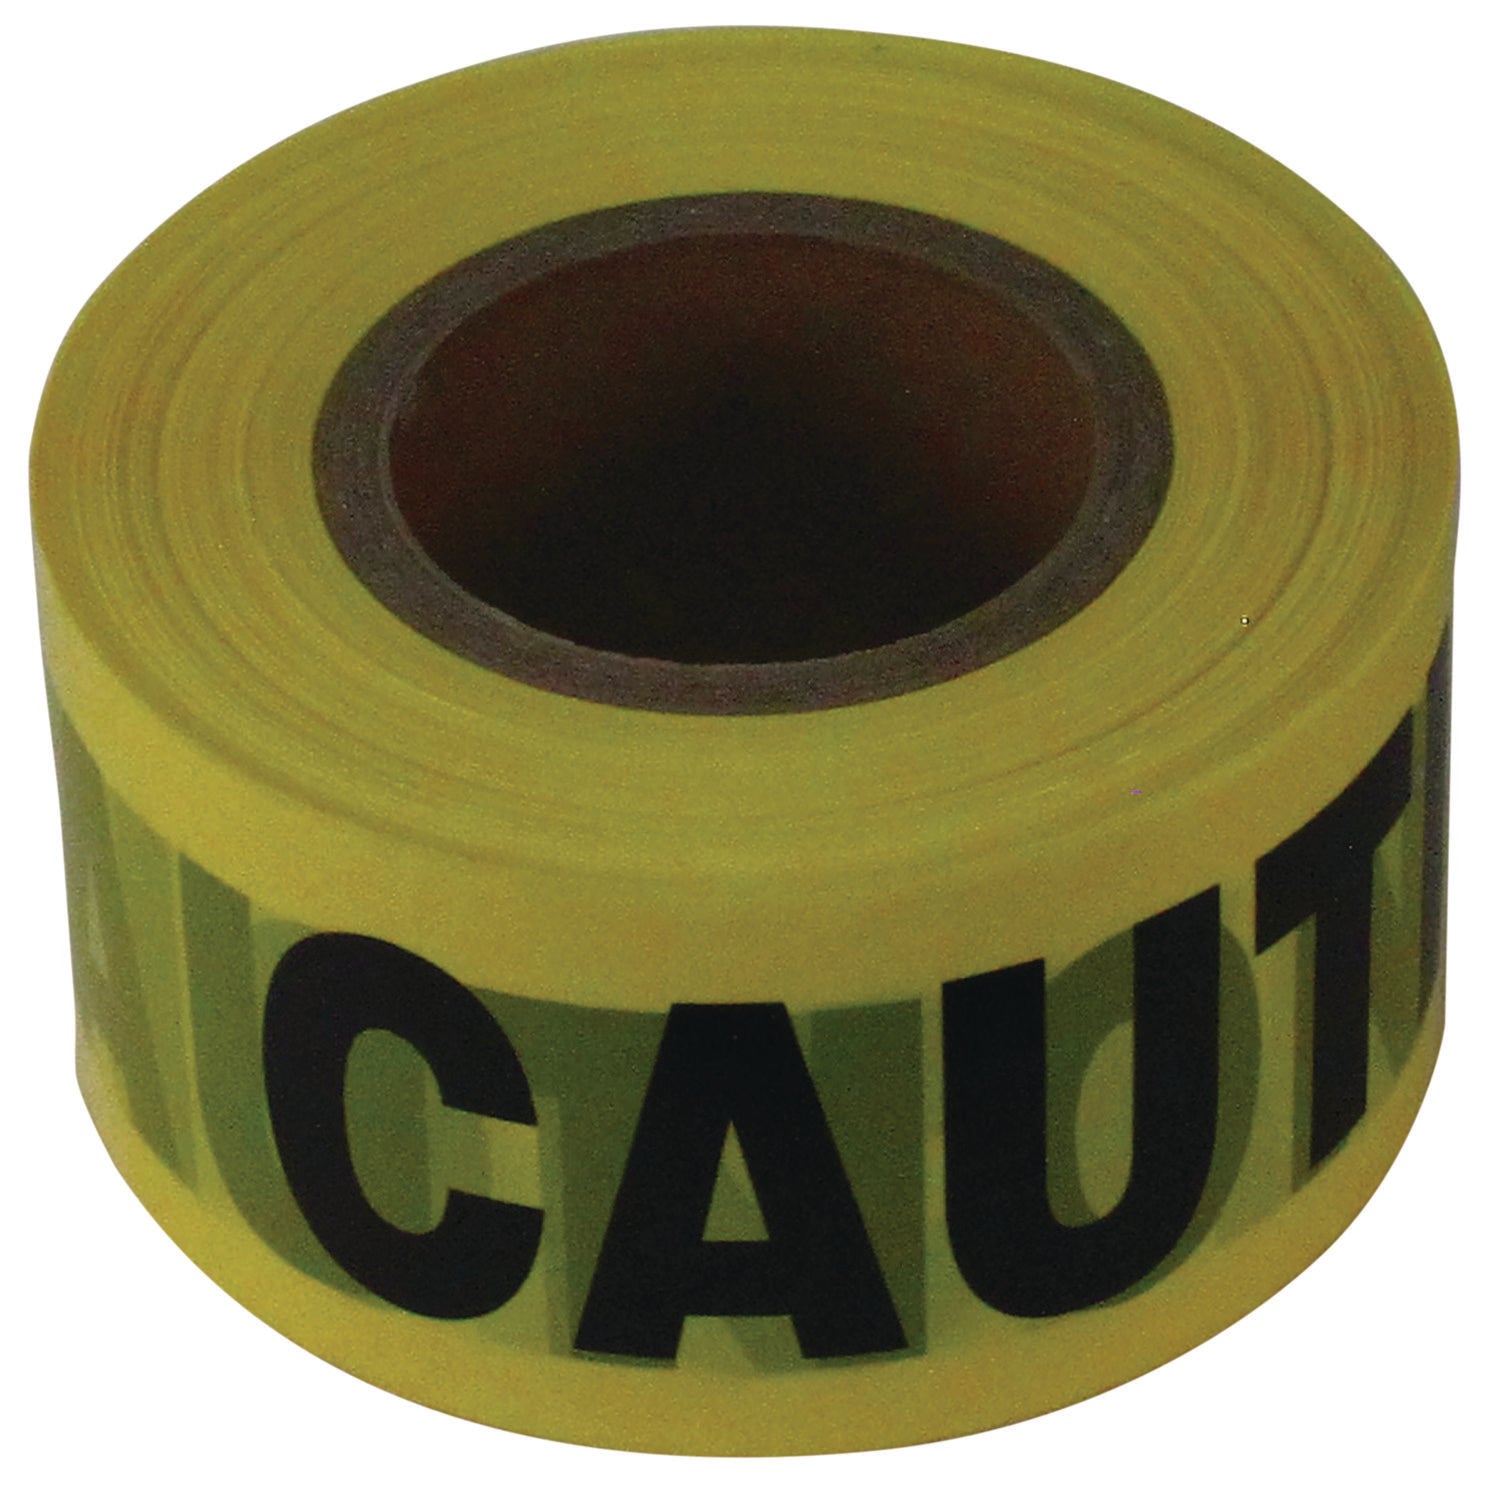 site-safety-barrier-tape-caution-text-3-x-1000-ft-yellow-black_imp7328 - 2